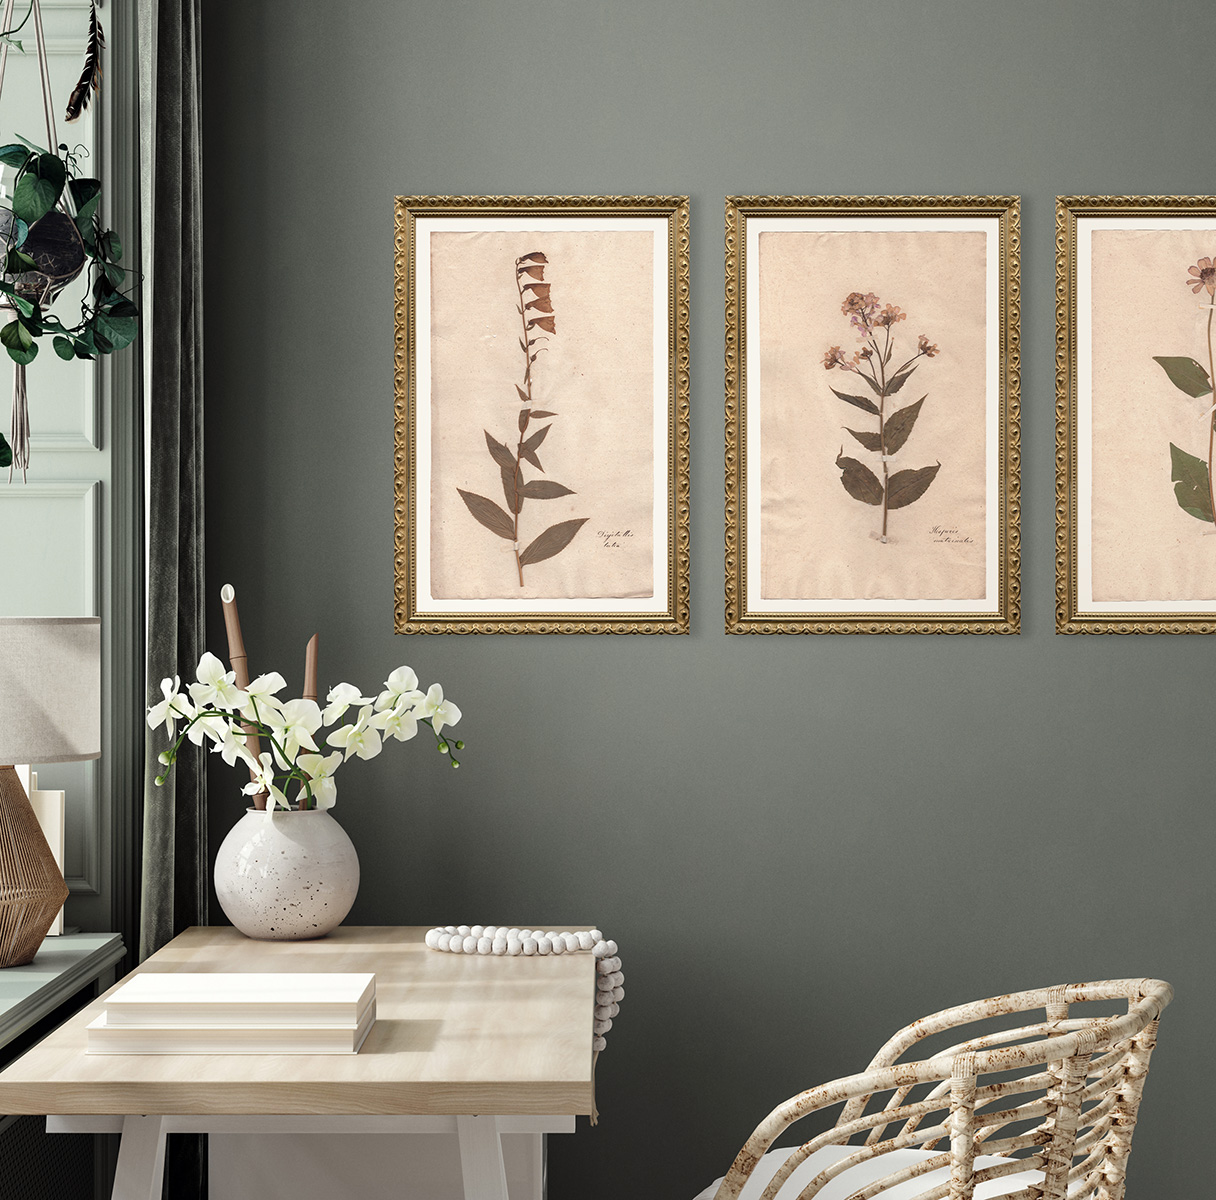 Framed Herbarium prints on office wall by Summer Weeds